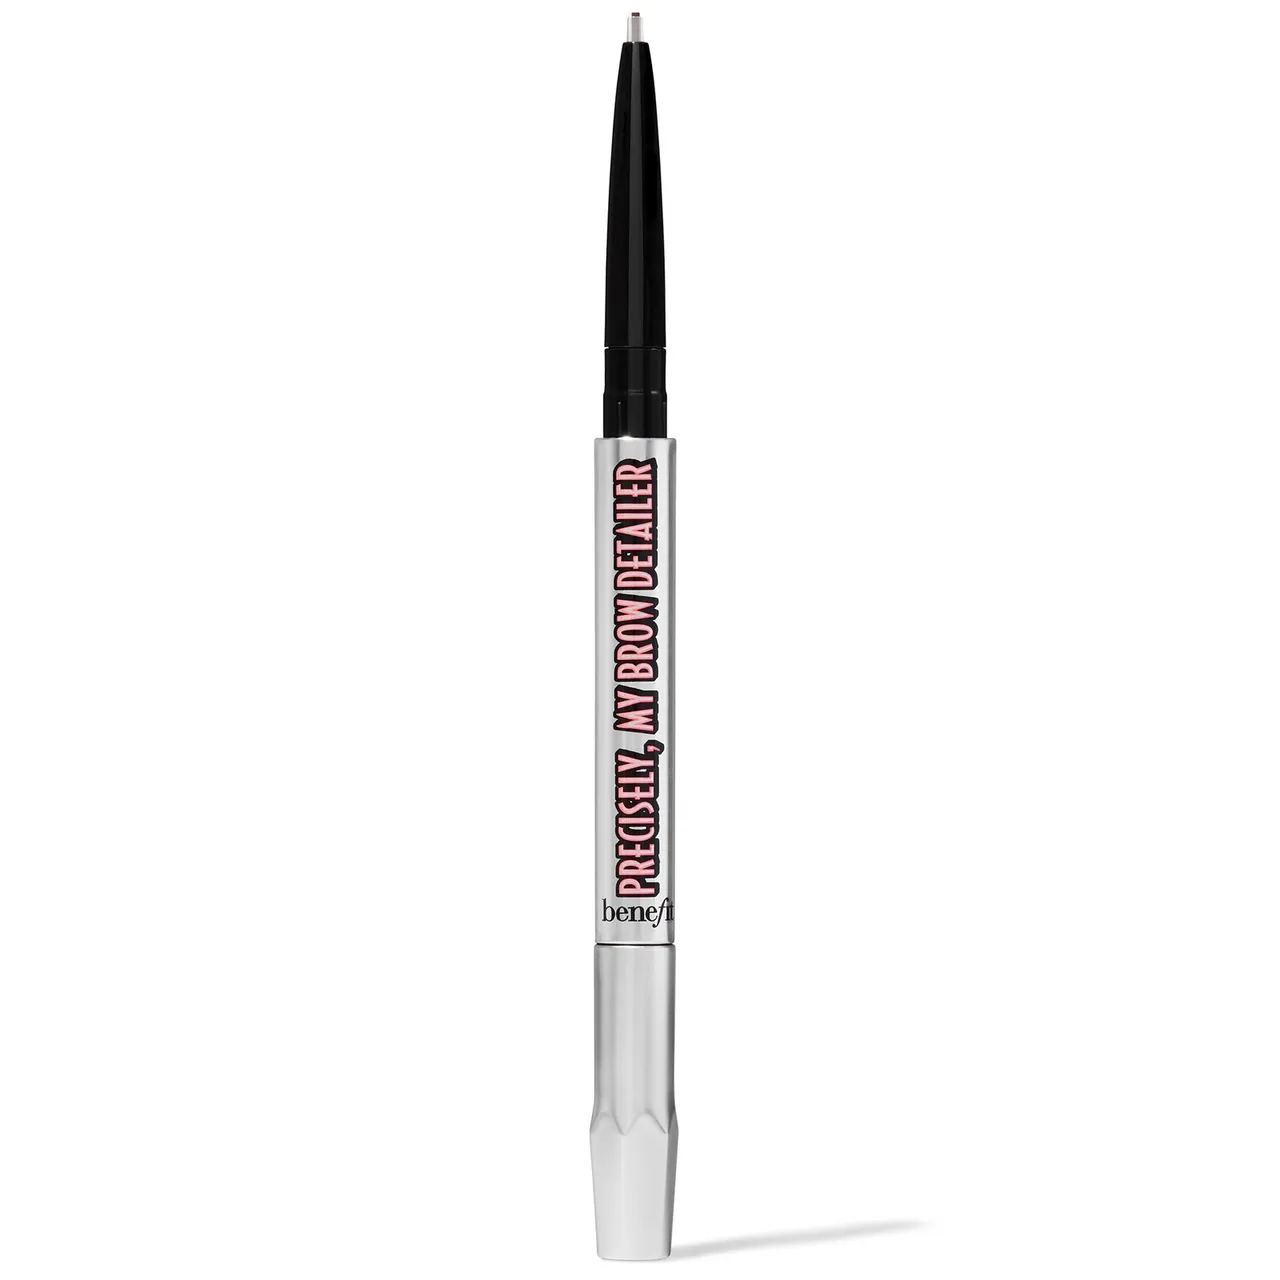 benefit Precisely My Brow Detailer Micro-Fine Precision Pencil 0.02g (Various Shades) - 5 Warm Black-Brown